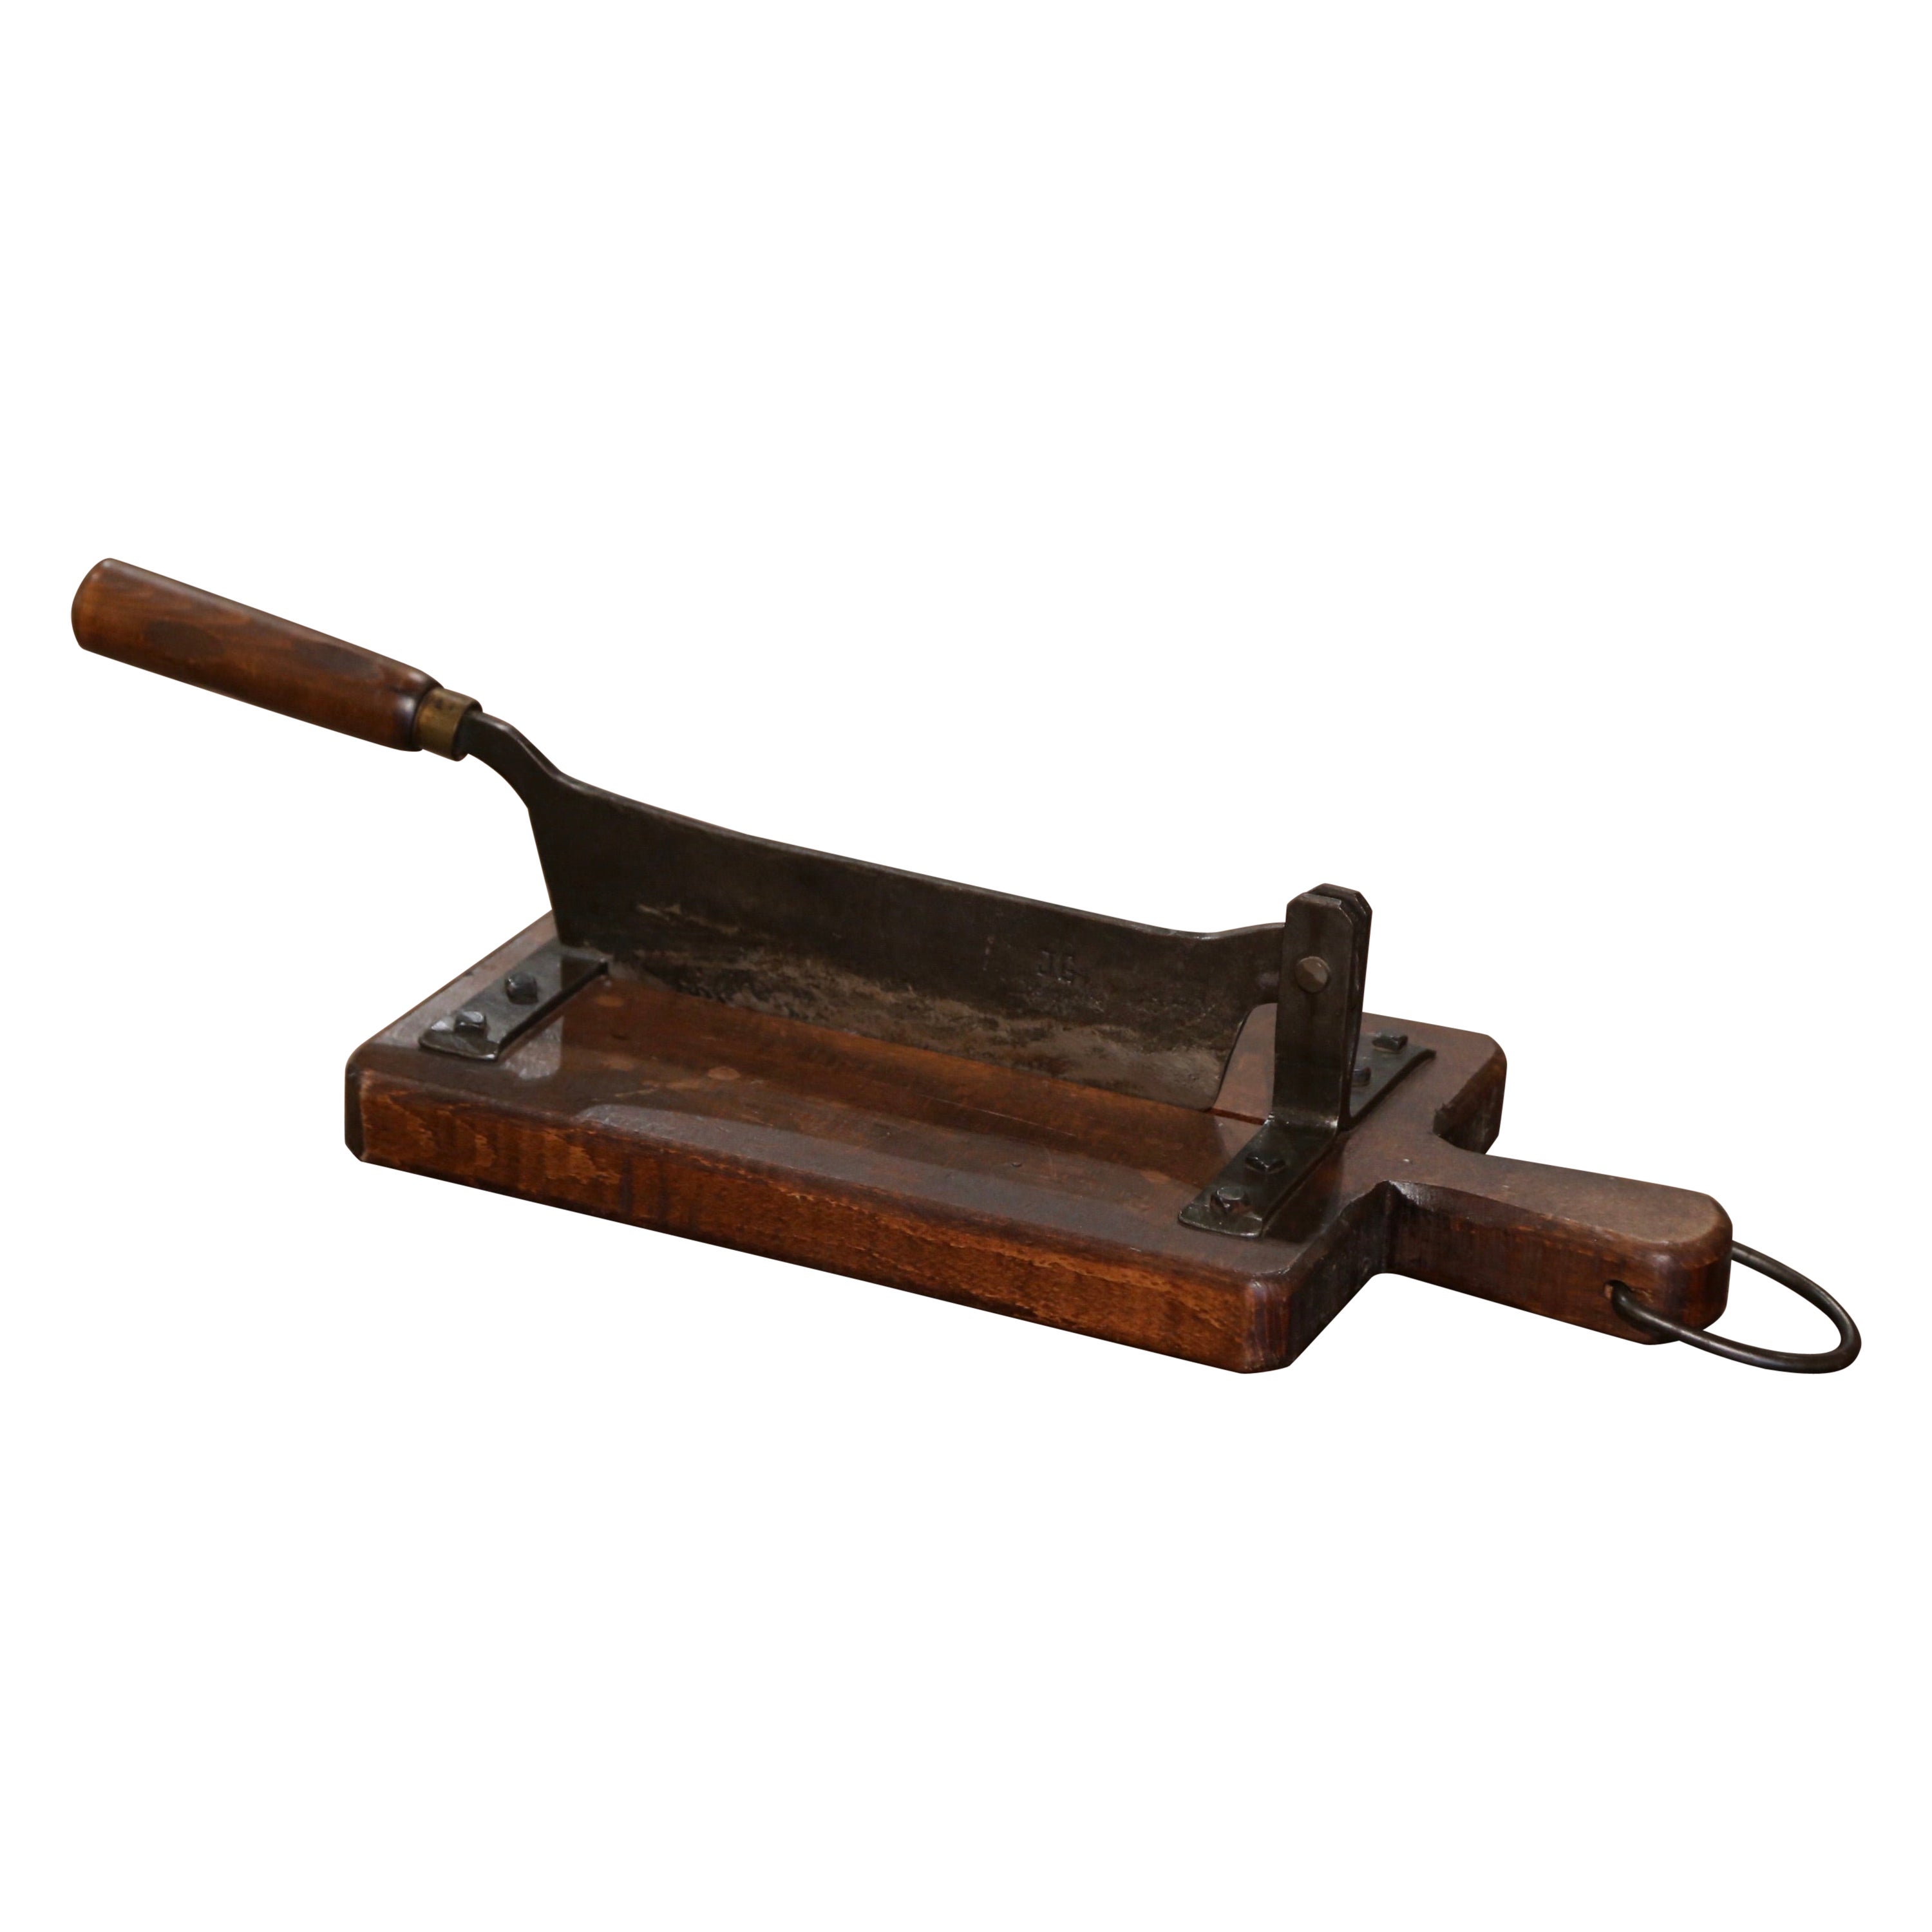  Early 20th Century French Country Wood and Iron Bakery Bread Cutter For Sale